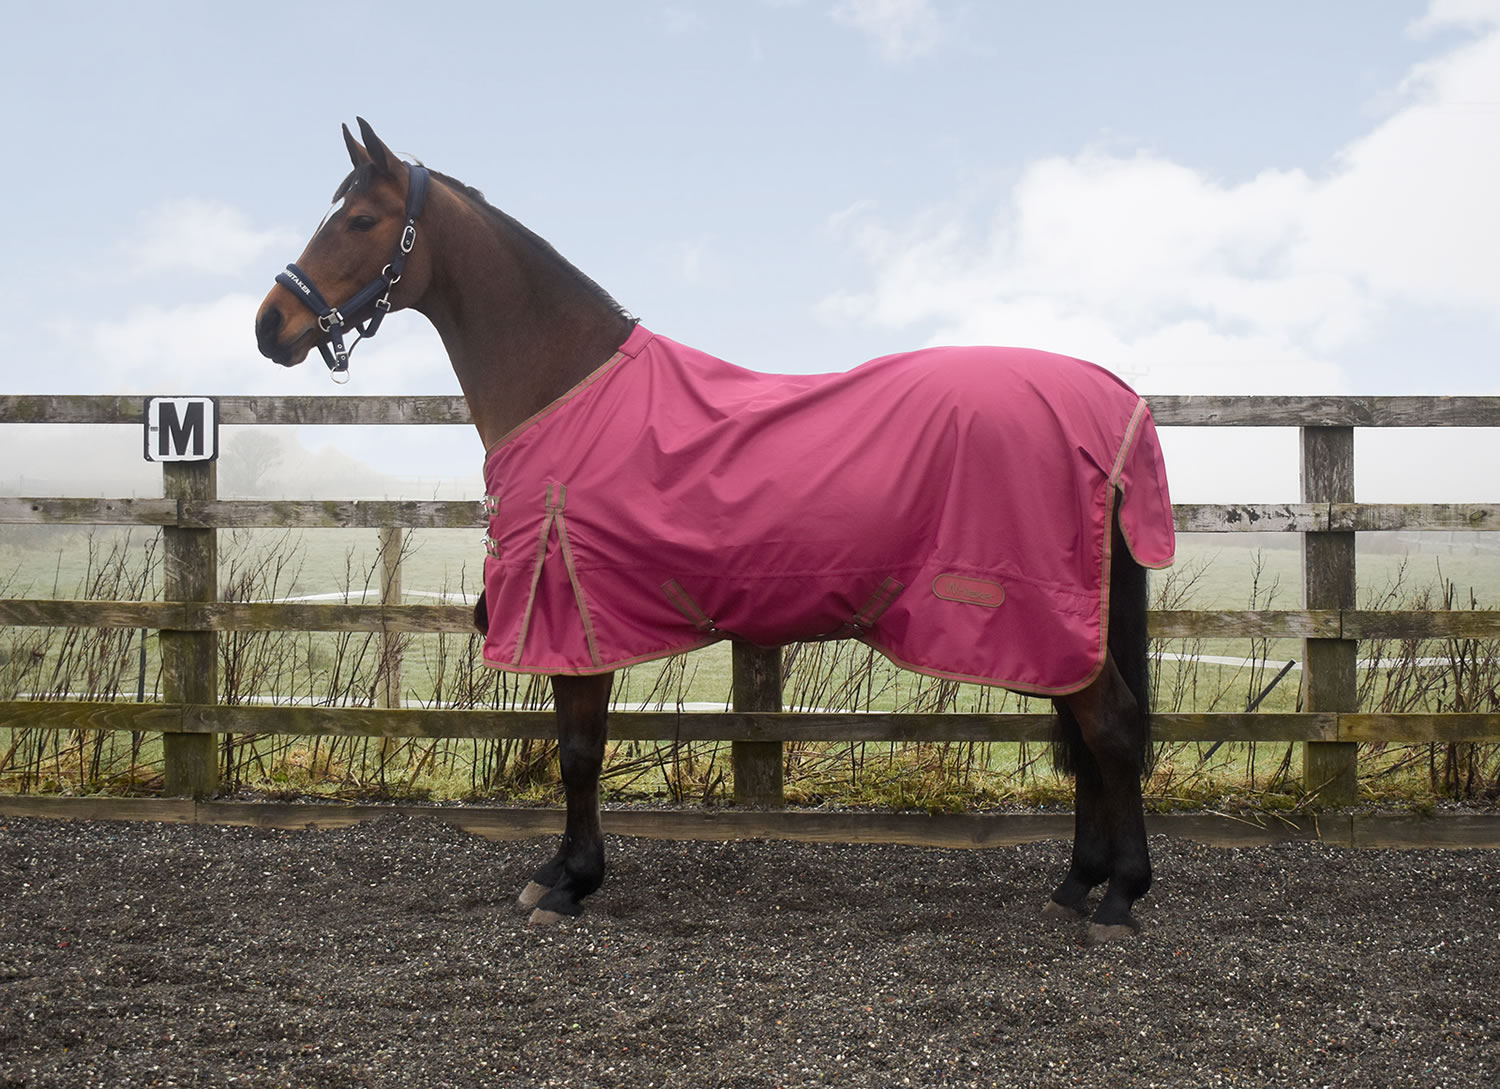 WHITAKER TURNOUT RUG EXLEY 0GM PLUM  5' 9'' TURNOUT RUG